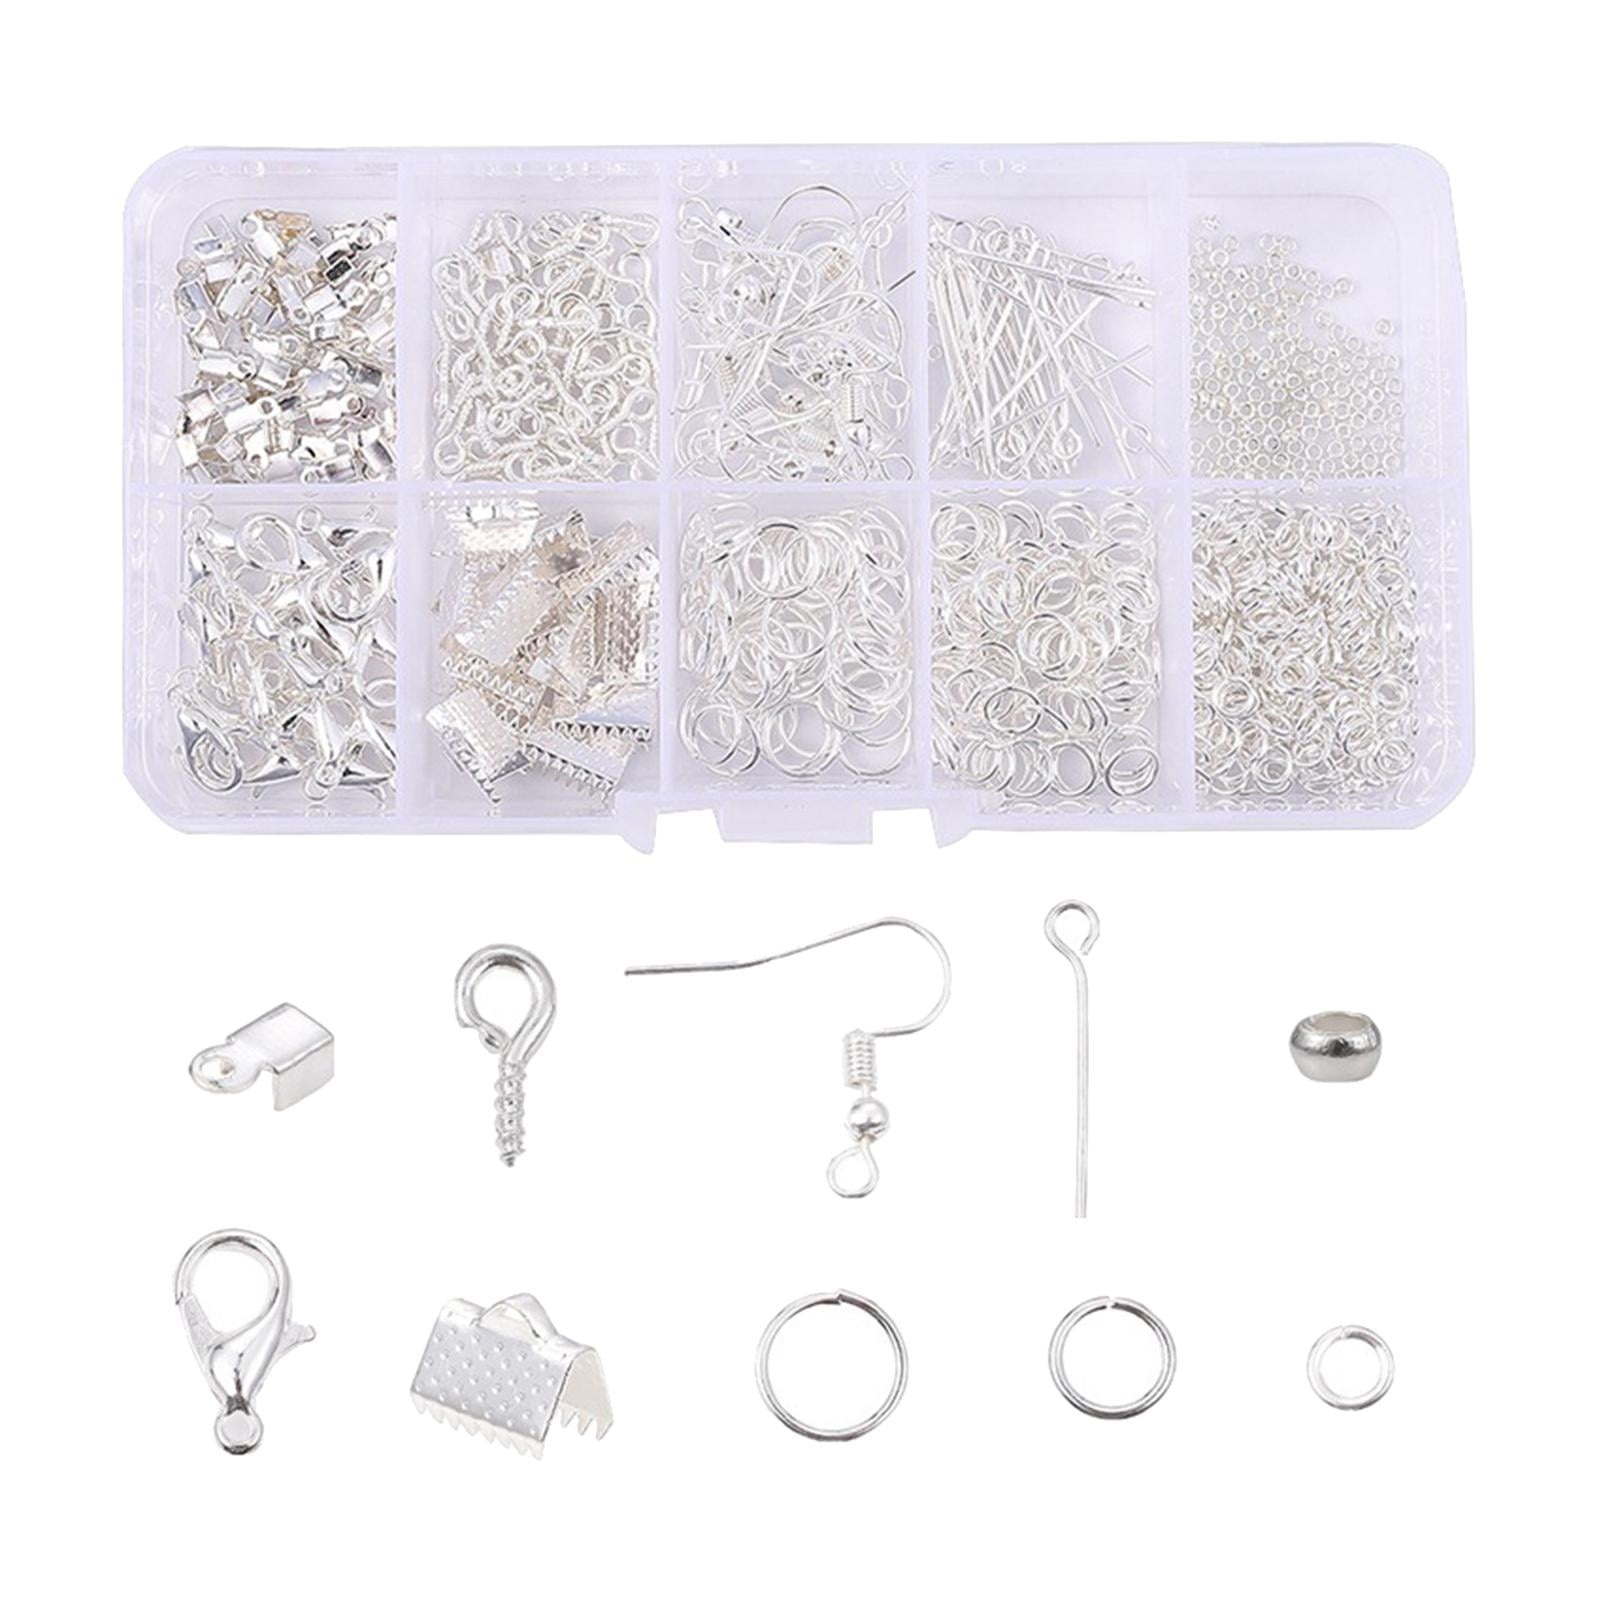 TOSEERY Earring Making Supplies Kit, 2418pcs Earring Hardware Pieces Repair Parts with Earring Hooks Posts Backs and Jump Rings for Making Earrings Studs and